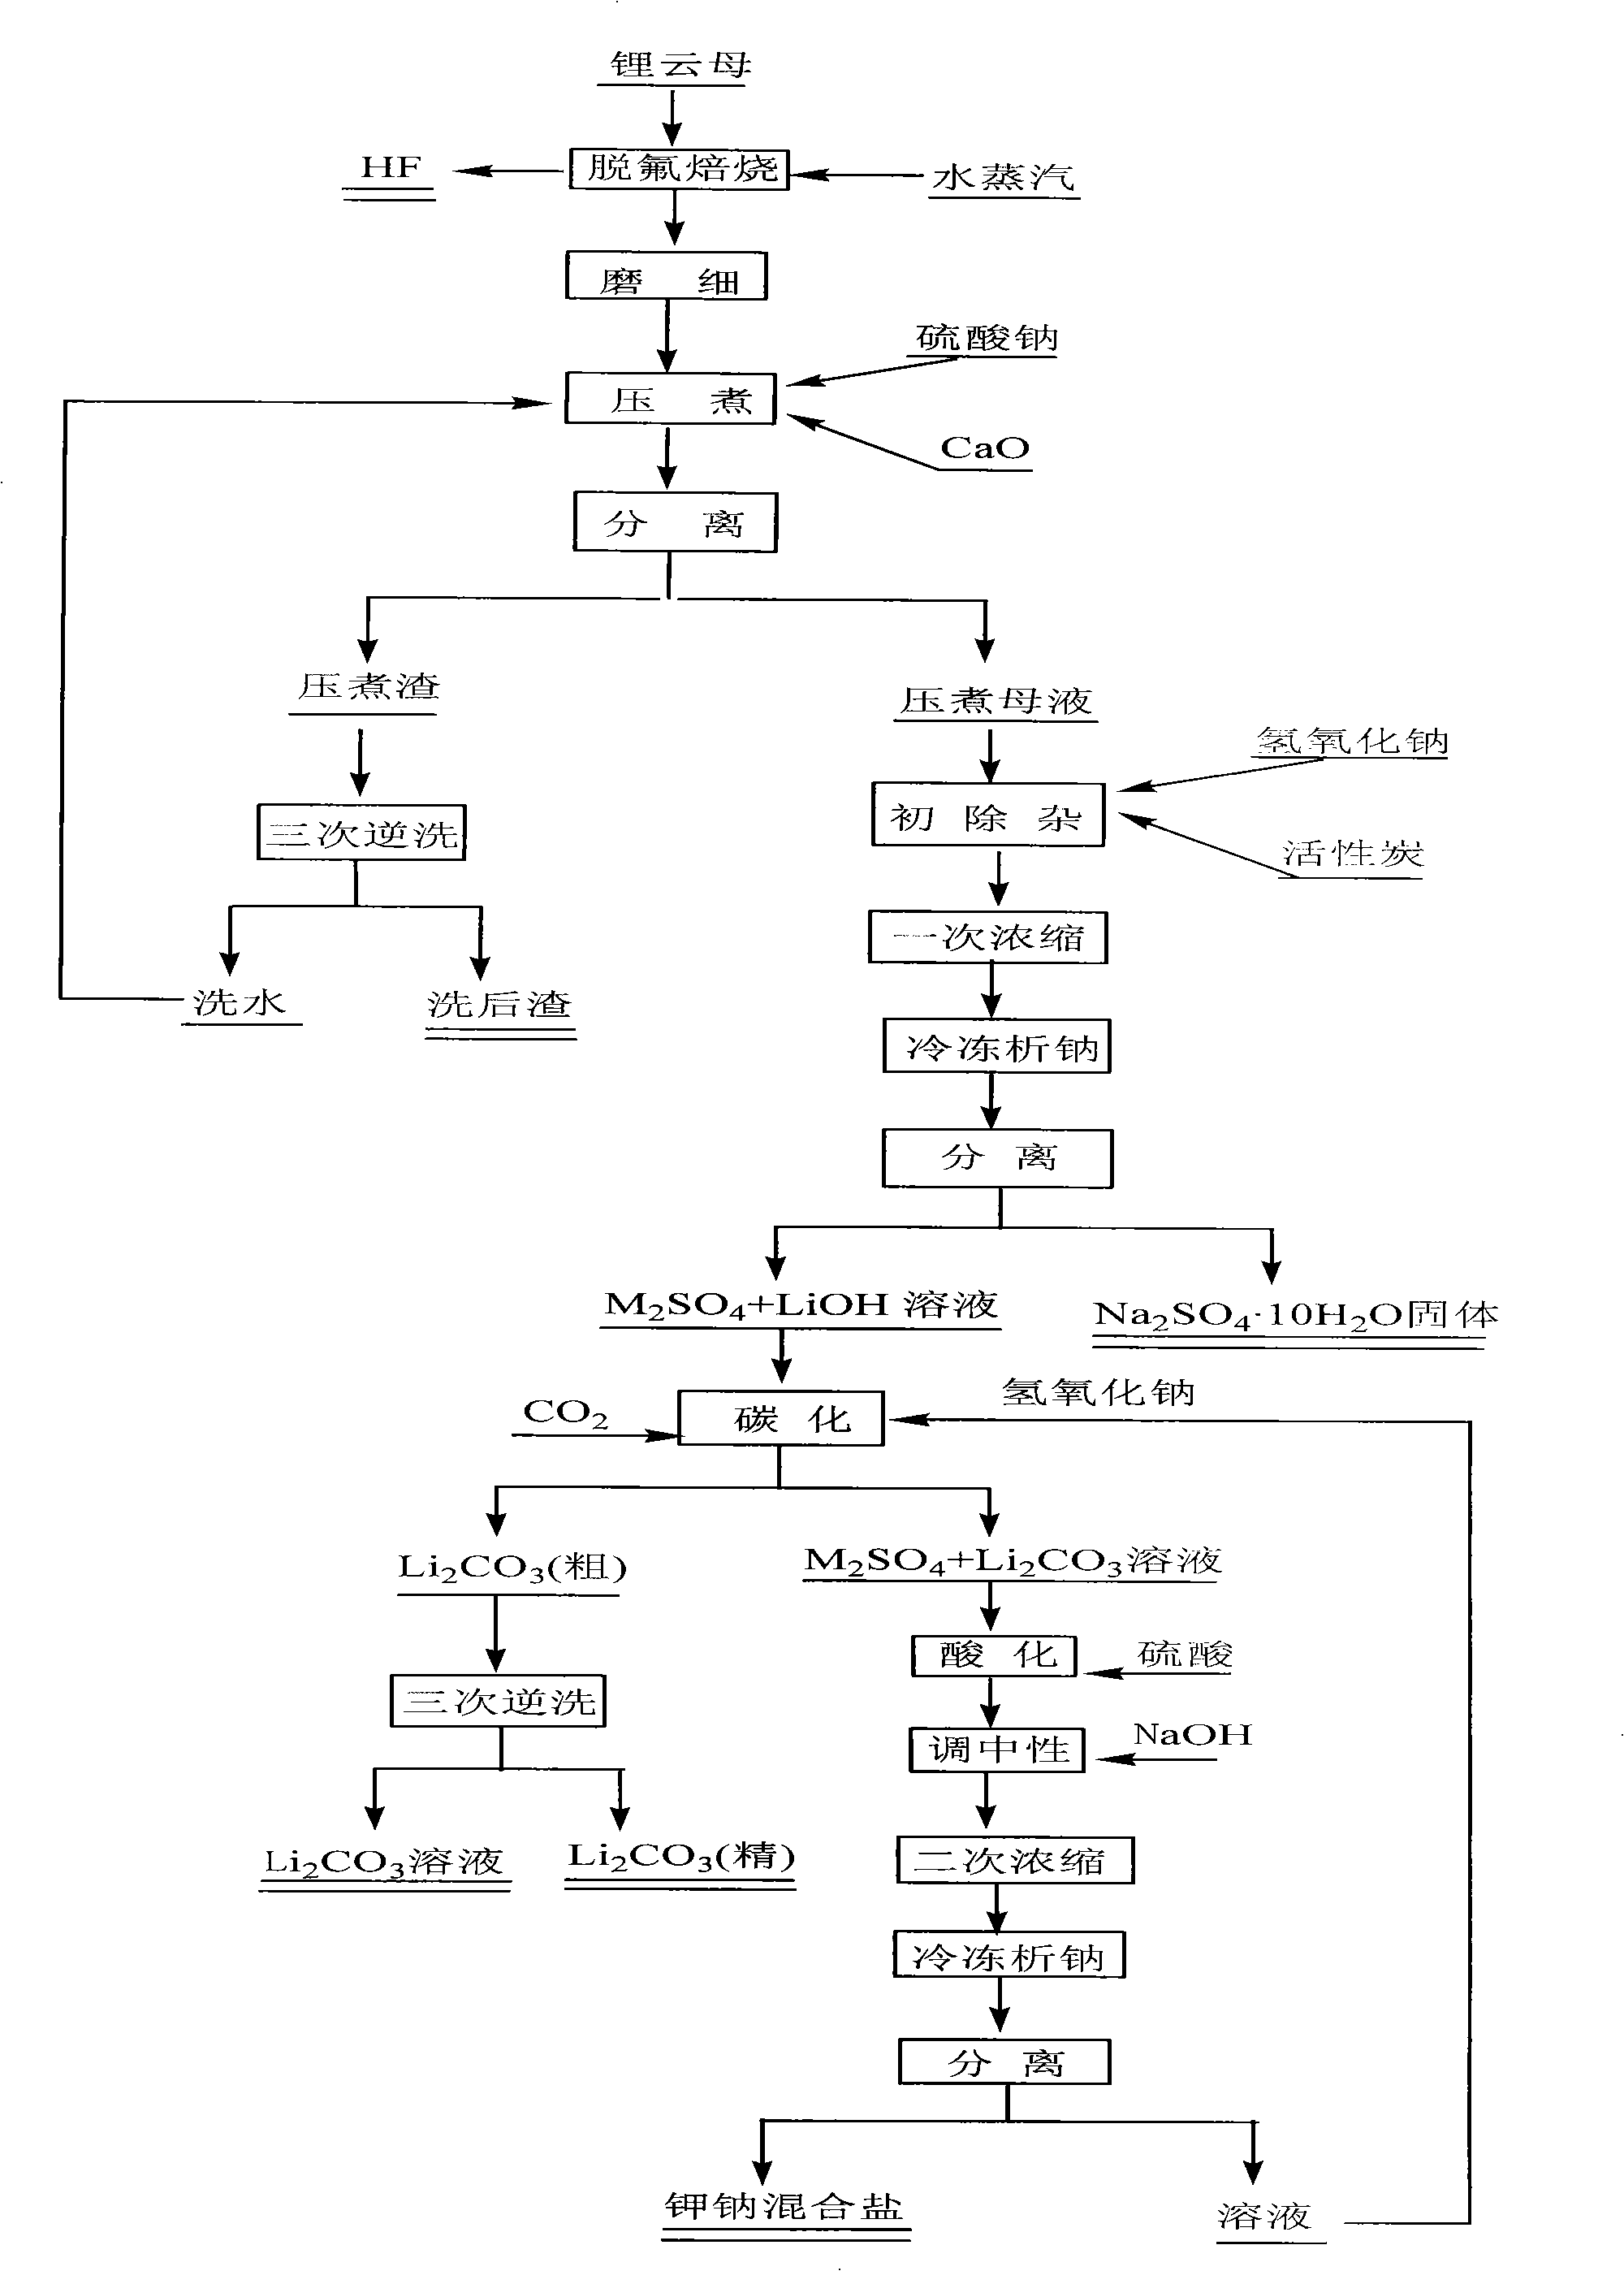 Method for preparing lithium carbonate by extracting lithium from lepidolite